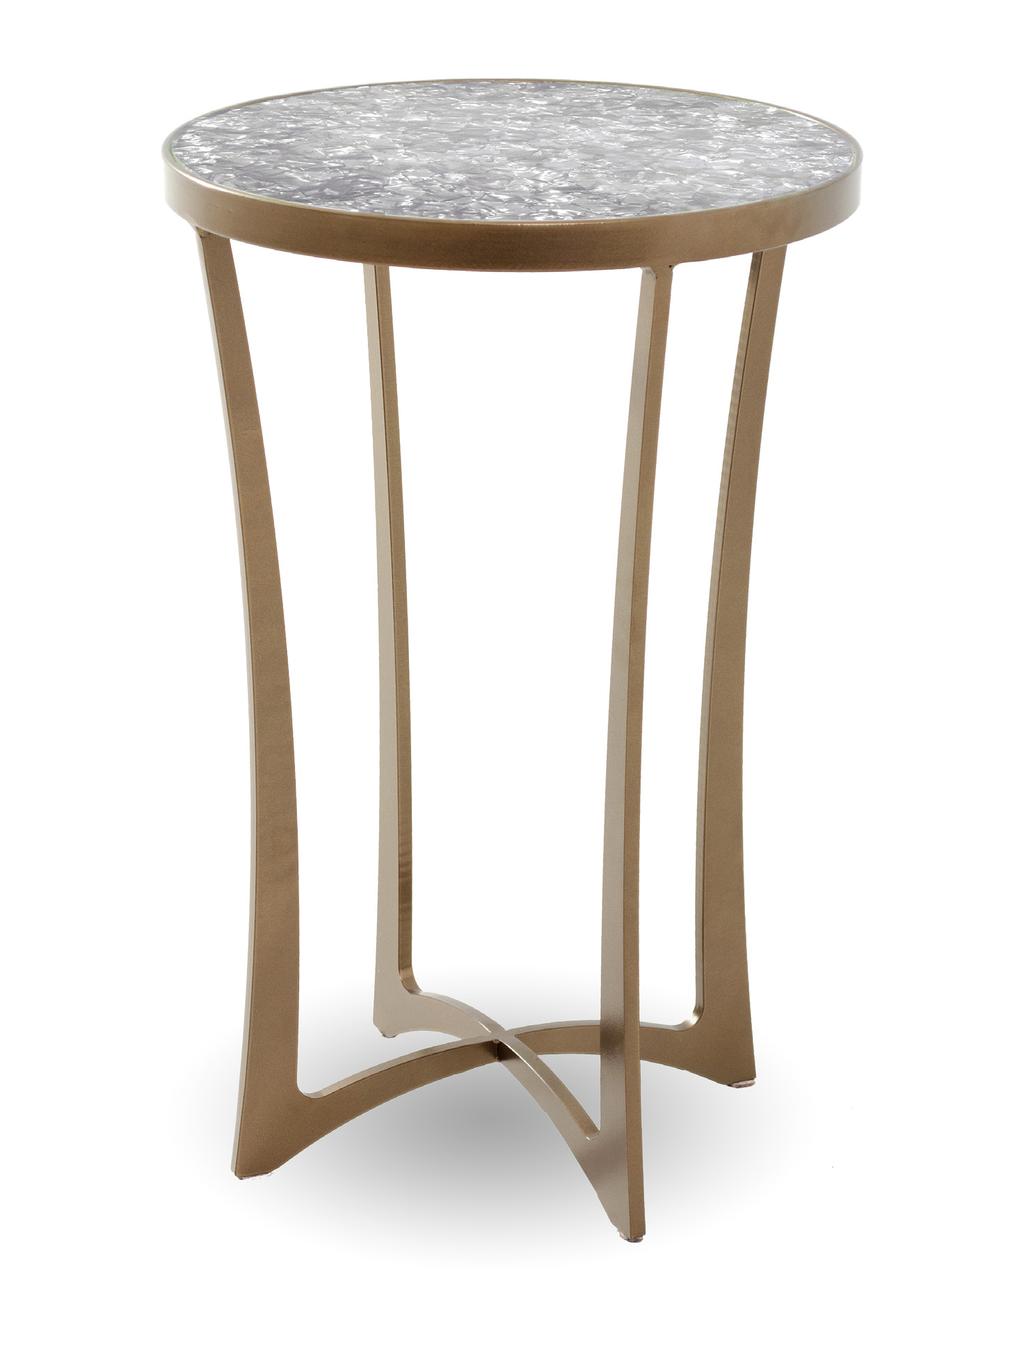 CF Finds Limited Edition Tops 7498 Limited Edition Lotus Drink Table with Pearl Glass top Table Dia.